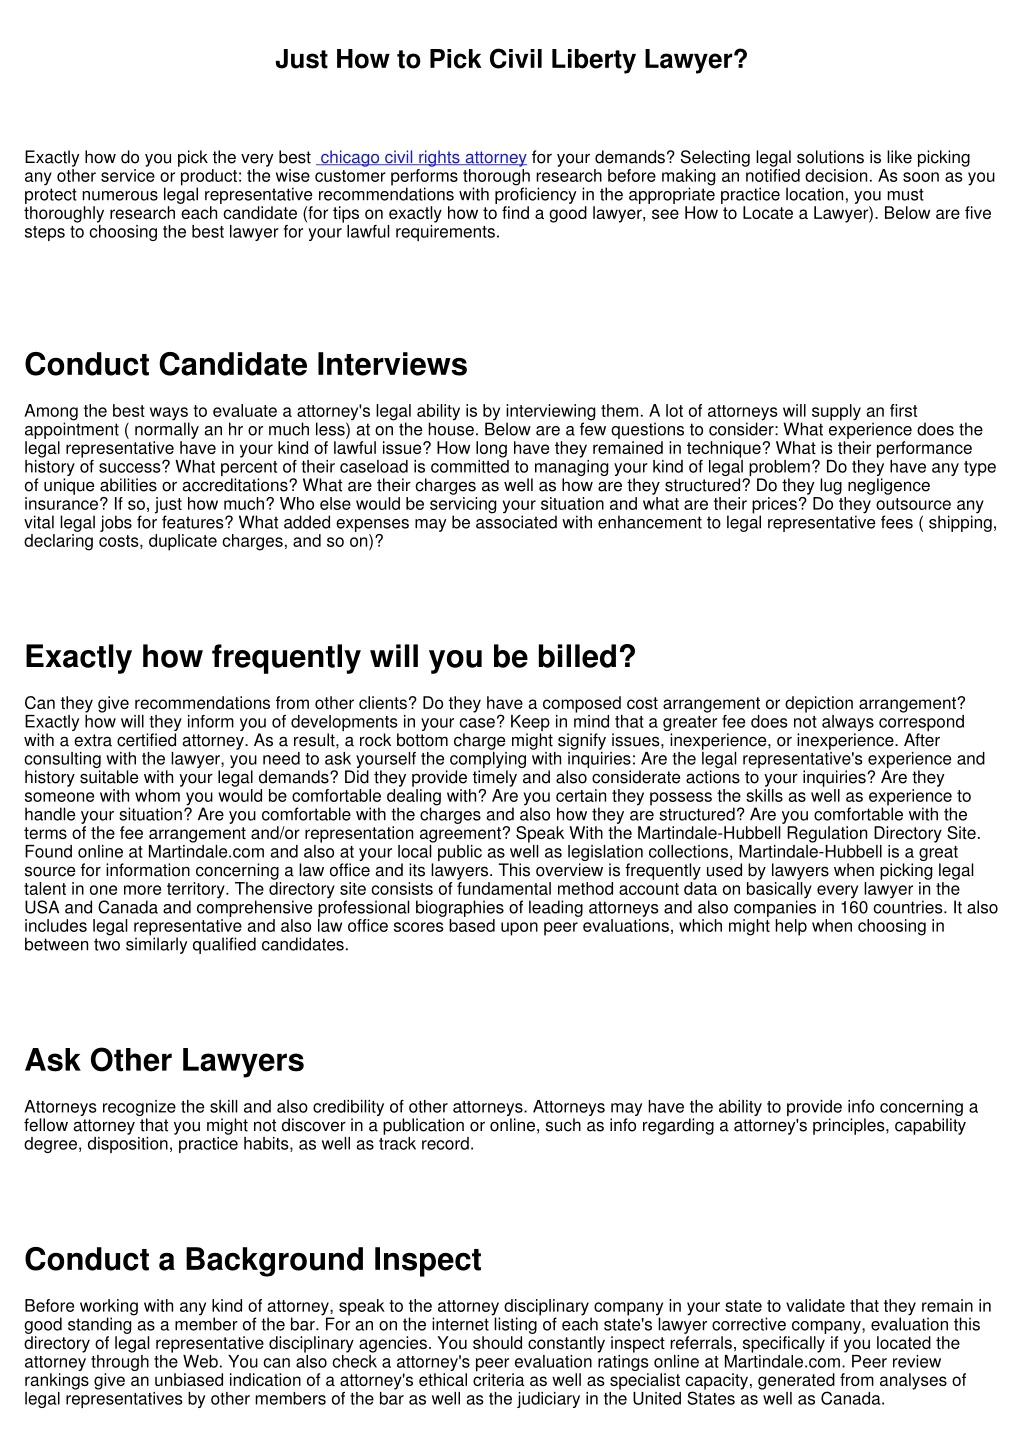 just how to pick civil liberty lawyer